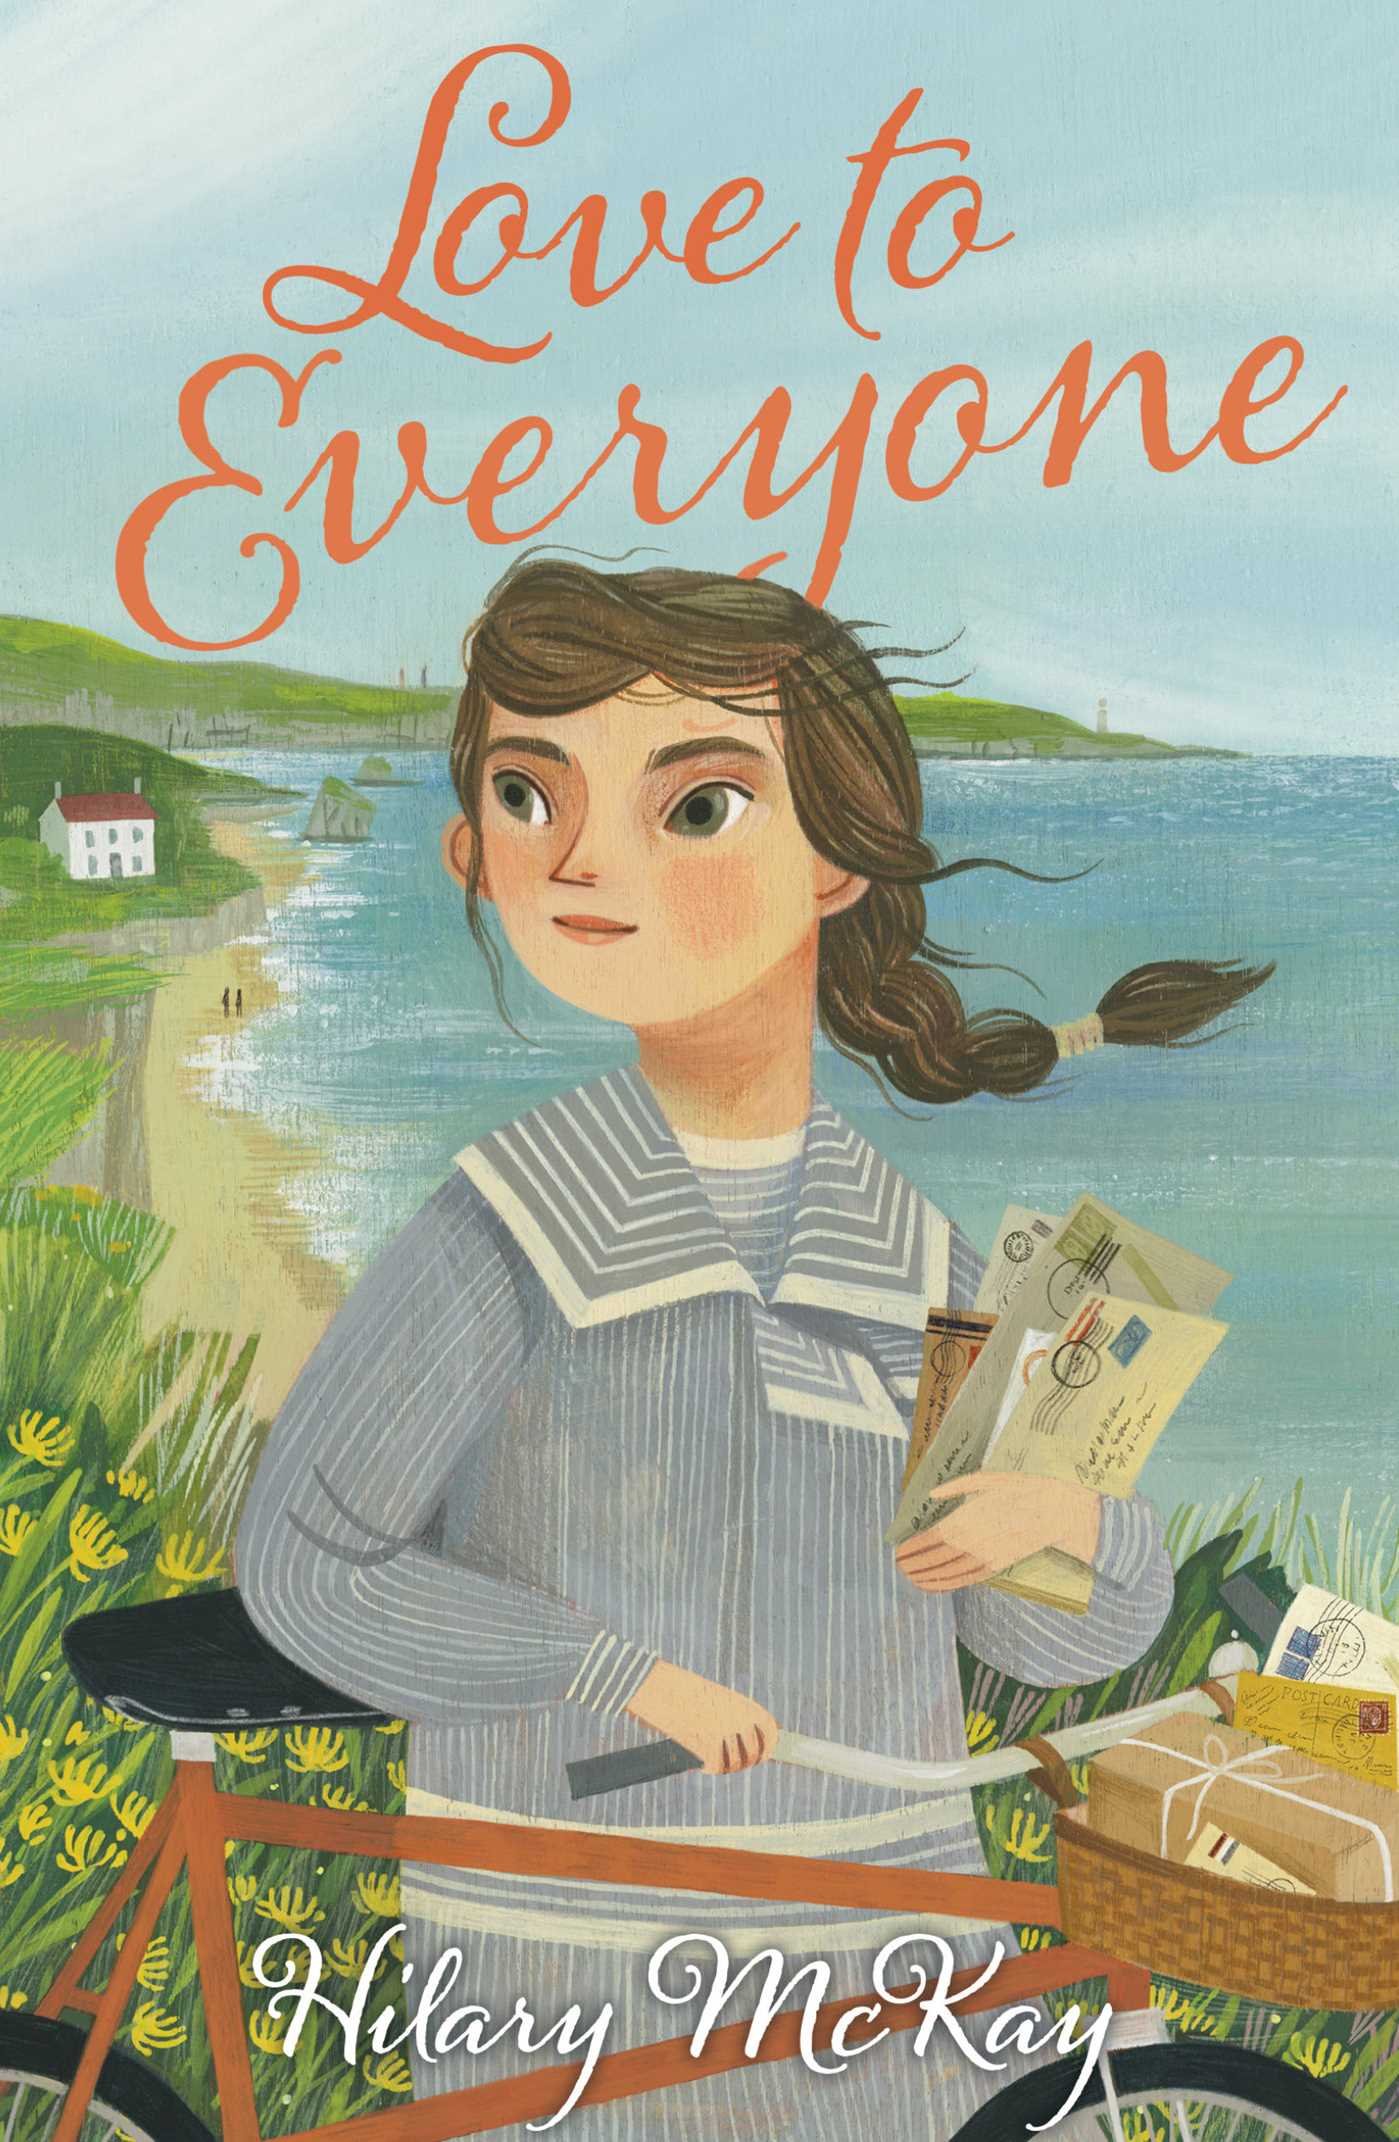 A book cover for Love to Everyone